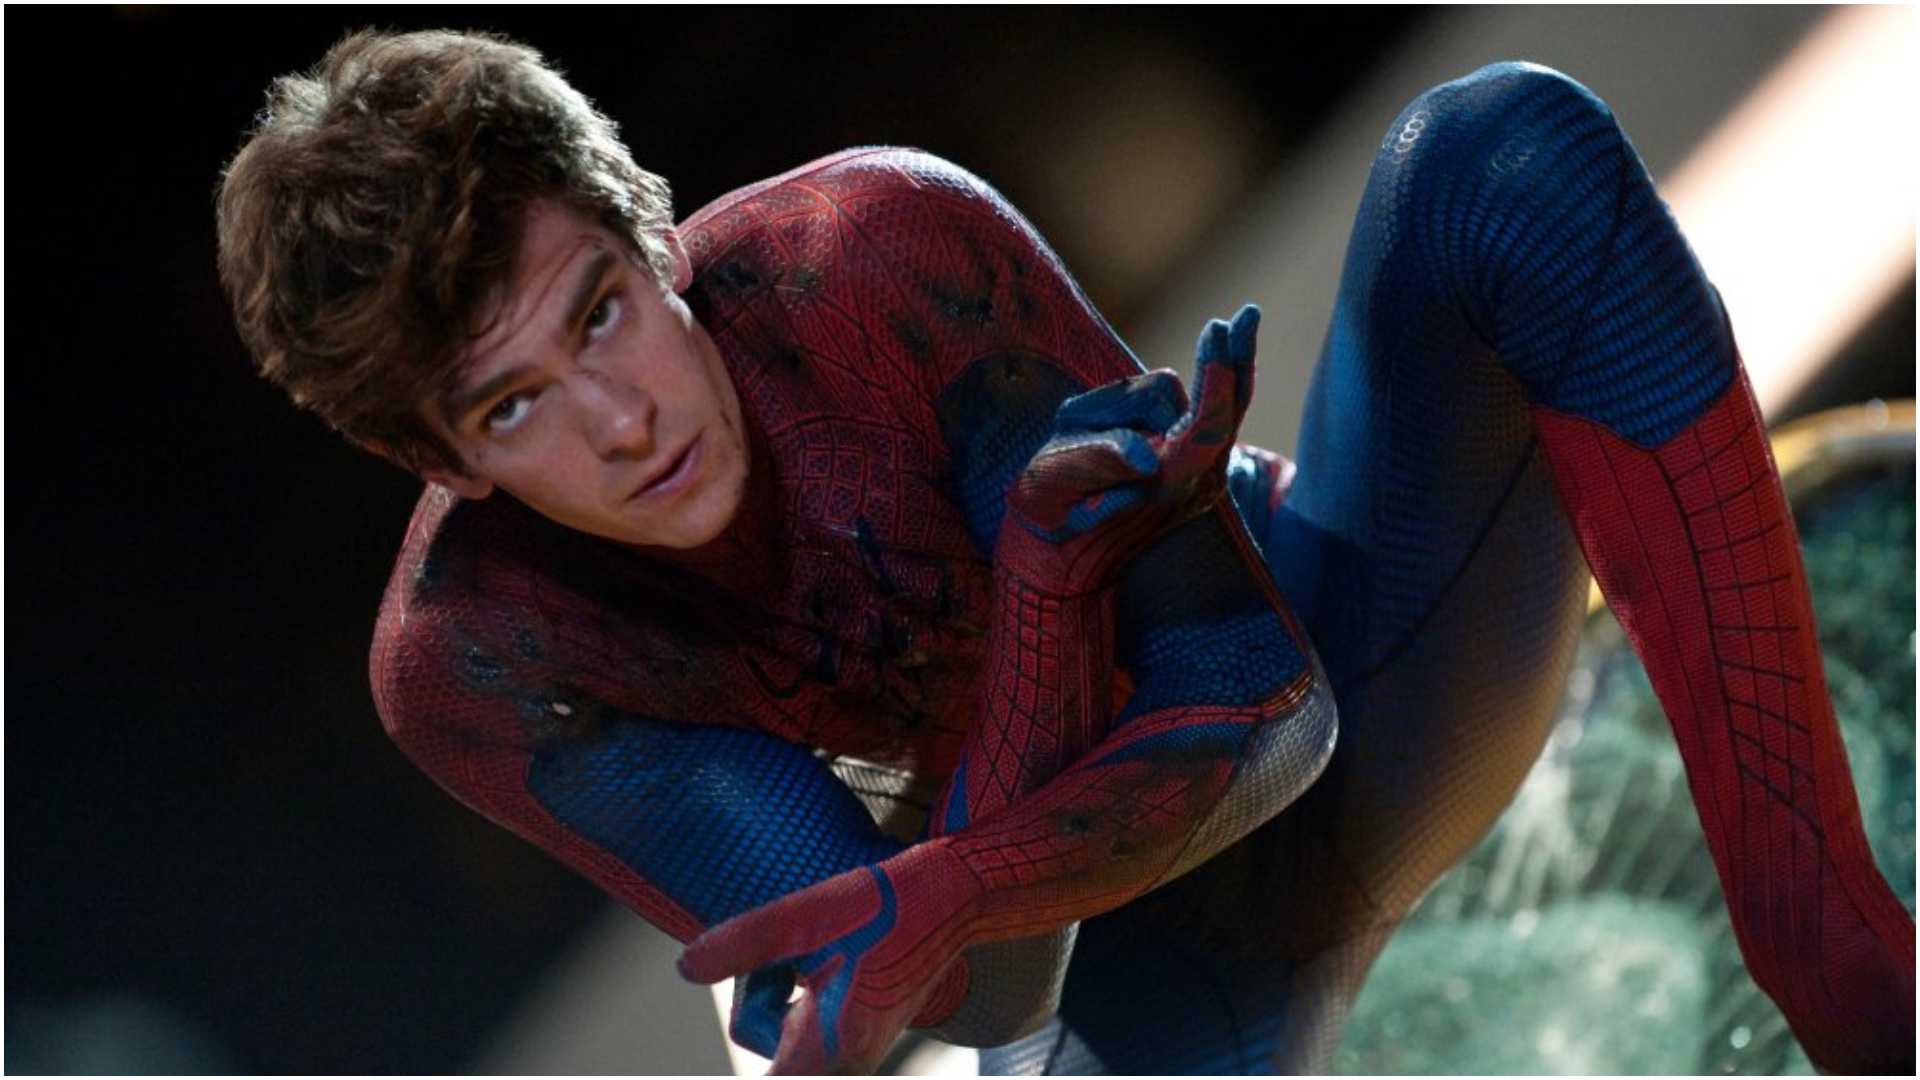 Andrew Garfield's secret Spider-Man screening with Tobey Maguire shocks fans